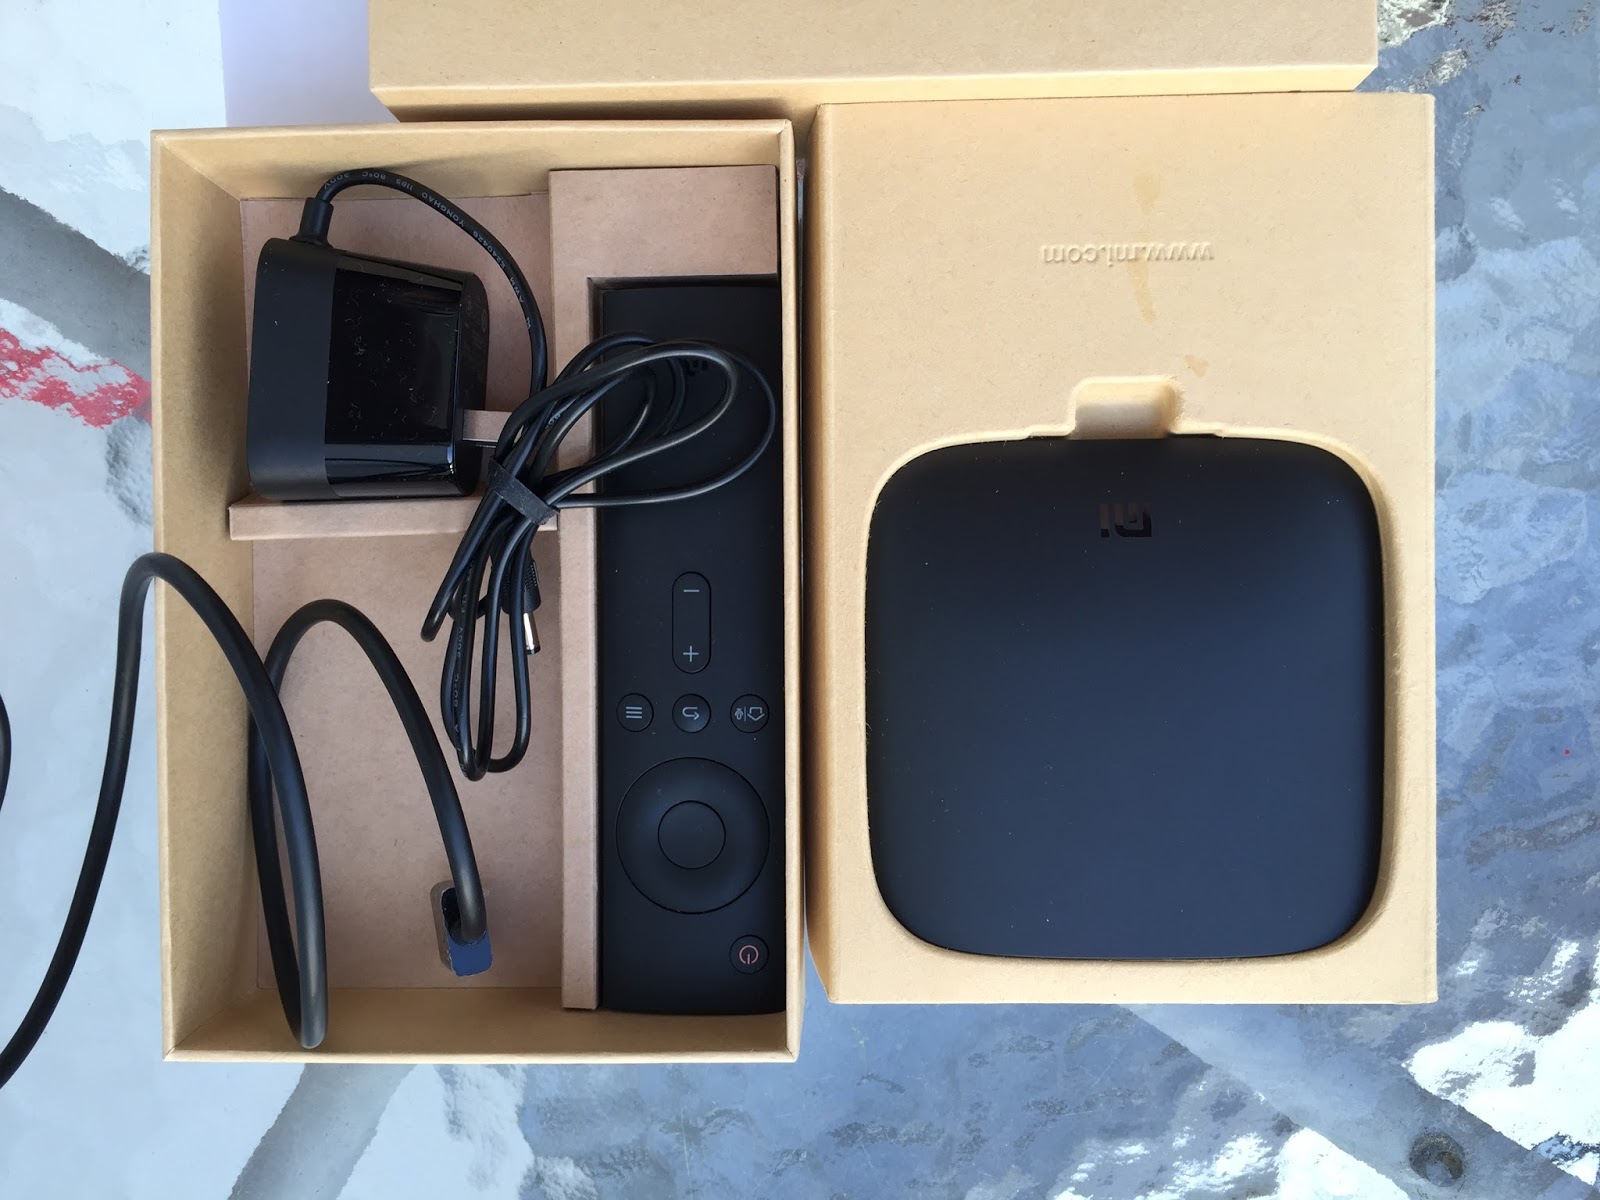 Xiaomi Mi Box 4K Unboxing and How To Setup With A 4K TV 